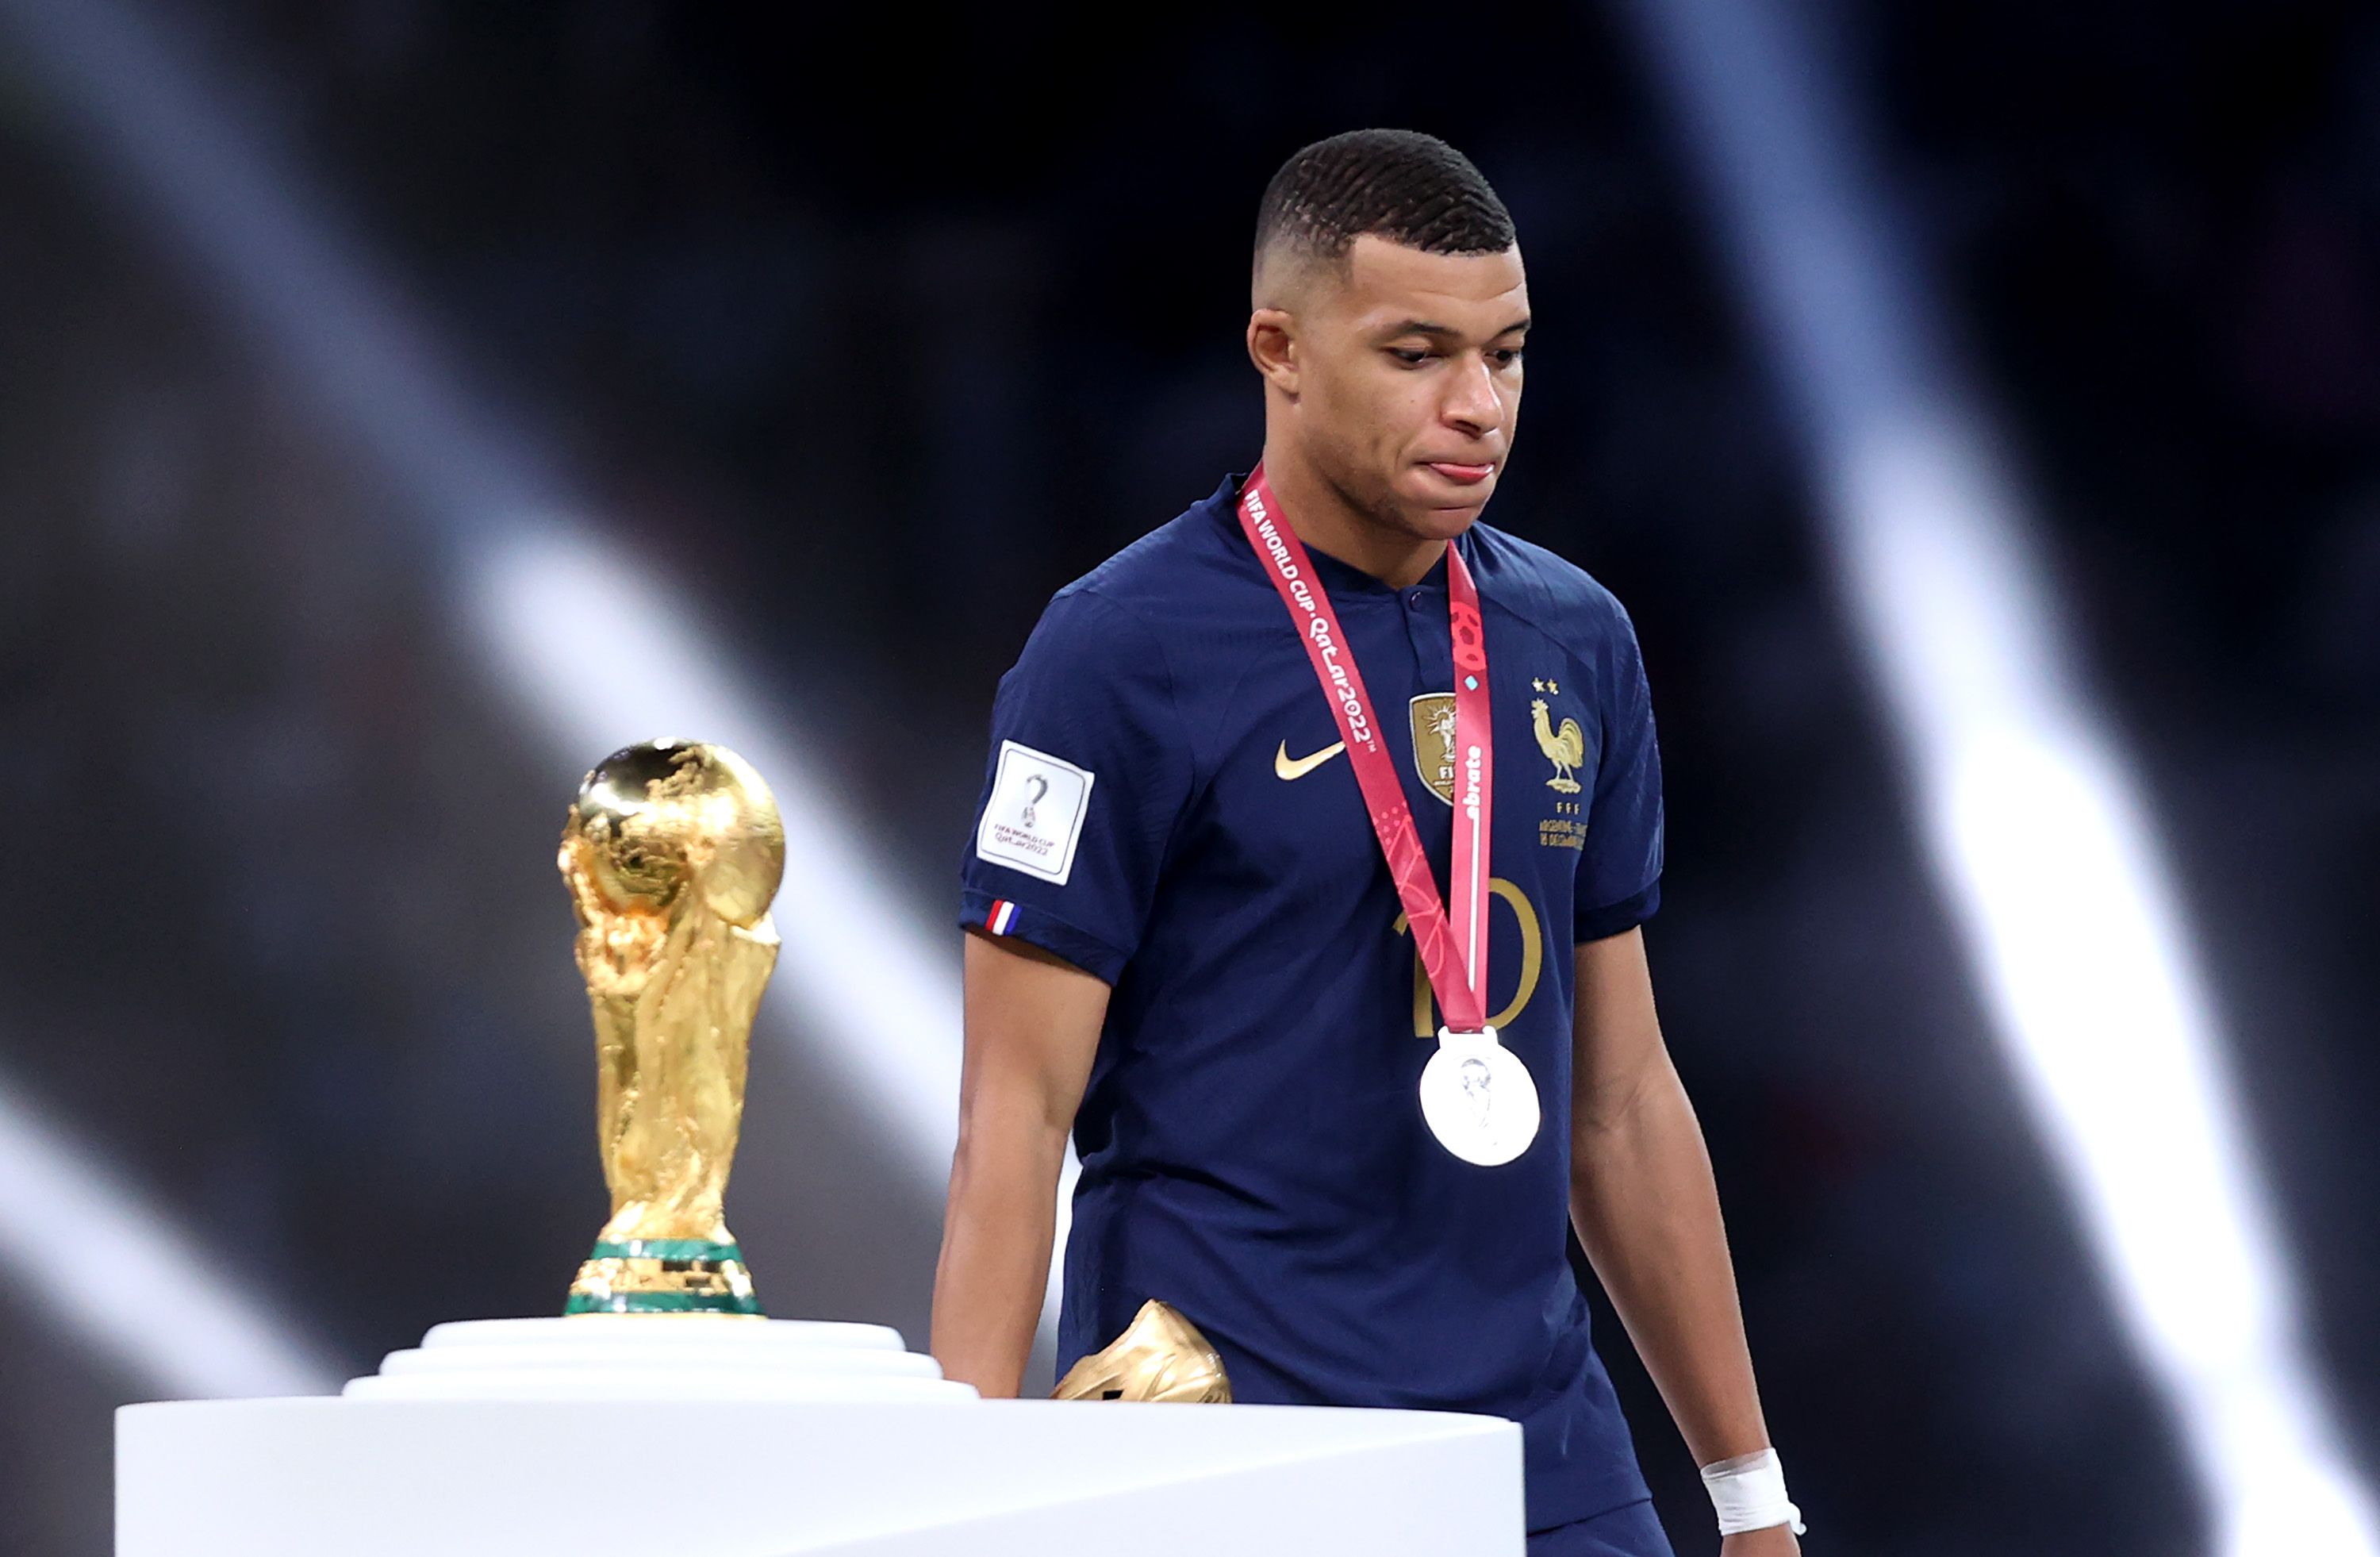 How Kylian Mbappé motivated Argentina before the World Cup final